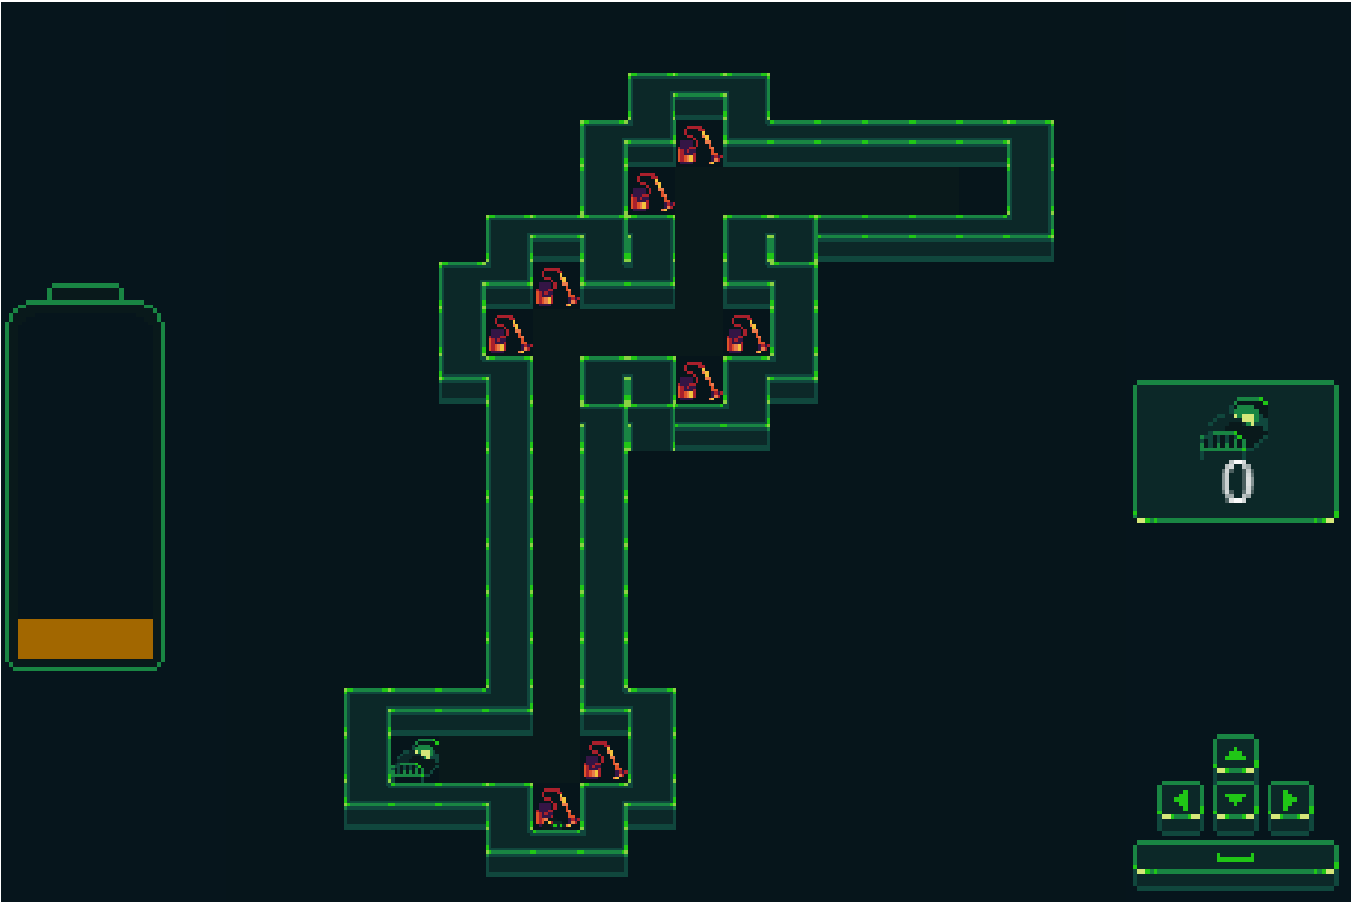 One of the procedurally generated tutorial levels.